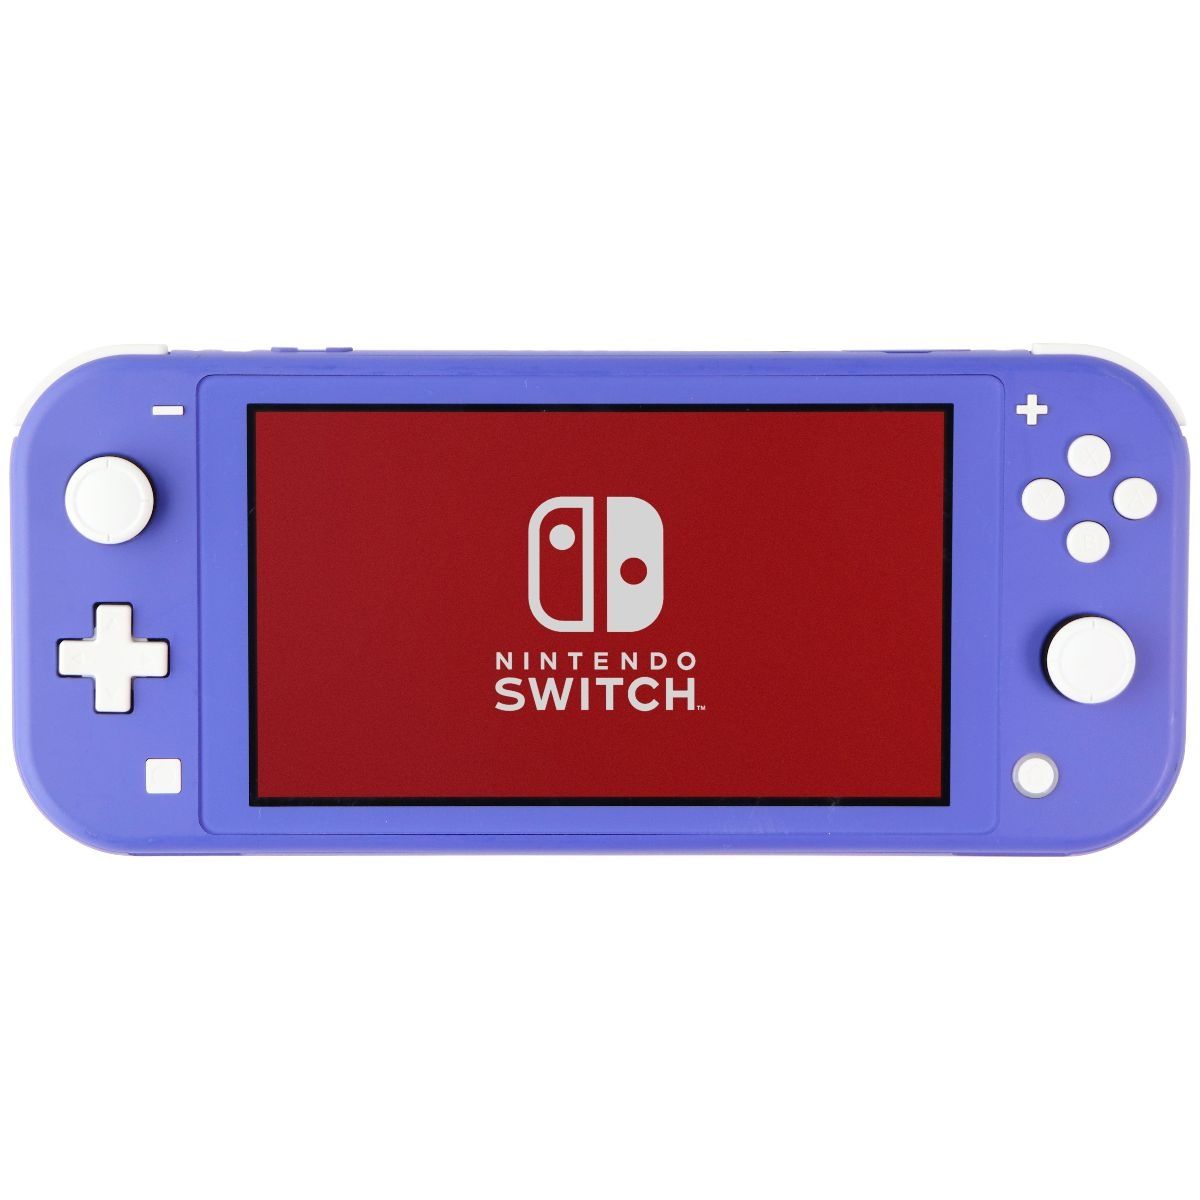 Nintendo Switch Lite Handheld Game Console - Blue (HDH-001) Gaming/Console - Video Game Consoles Nintendo    - Simple Cell Bulk Wholesale Pricing - USA Seller